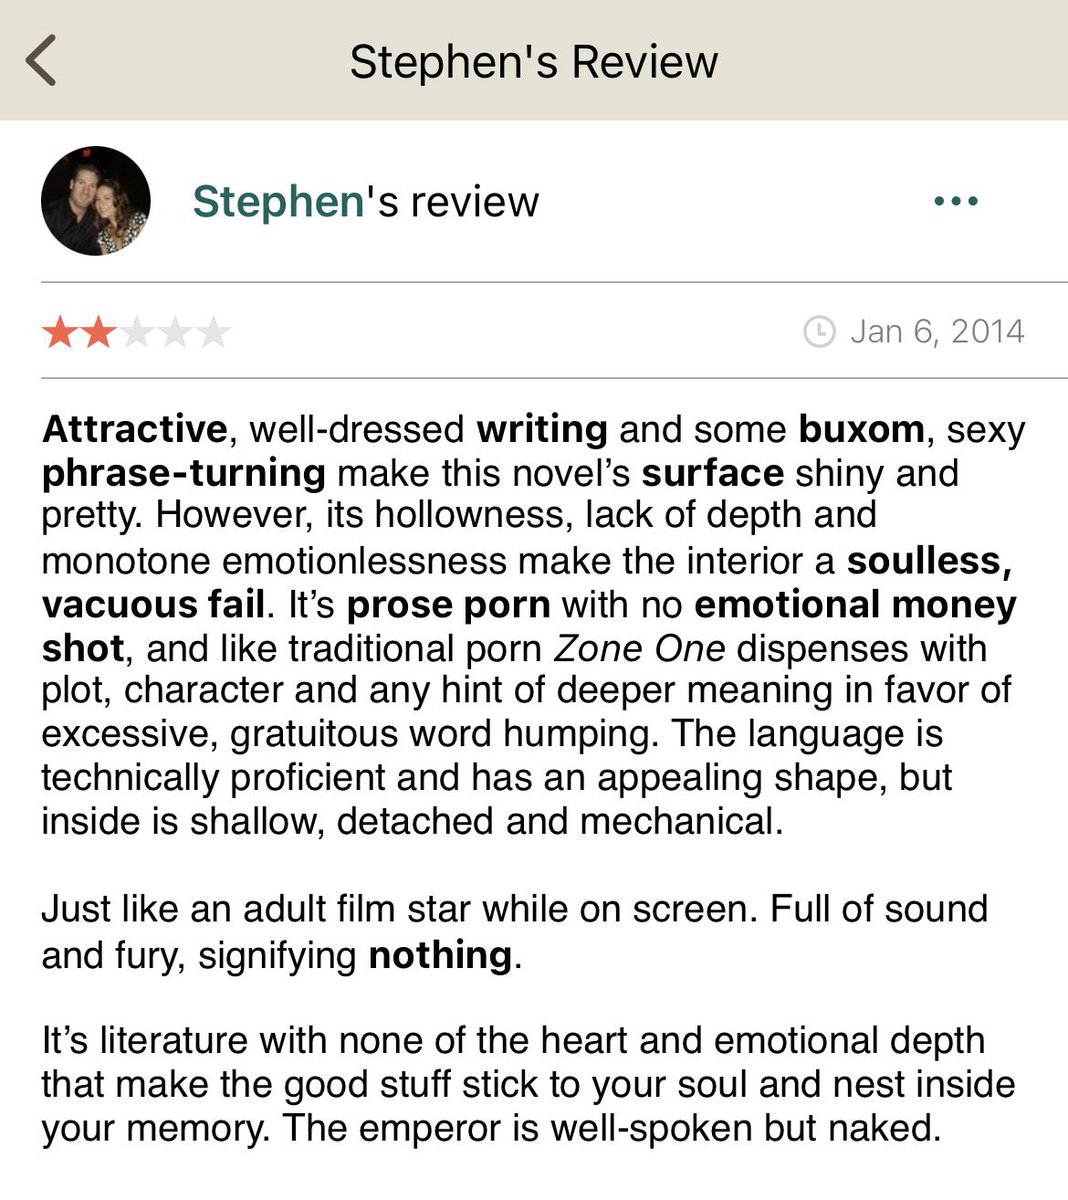 Who is Stephen and what book was he reviewing? I’m agog! I love it. “Nest insides your memory.”